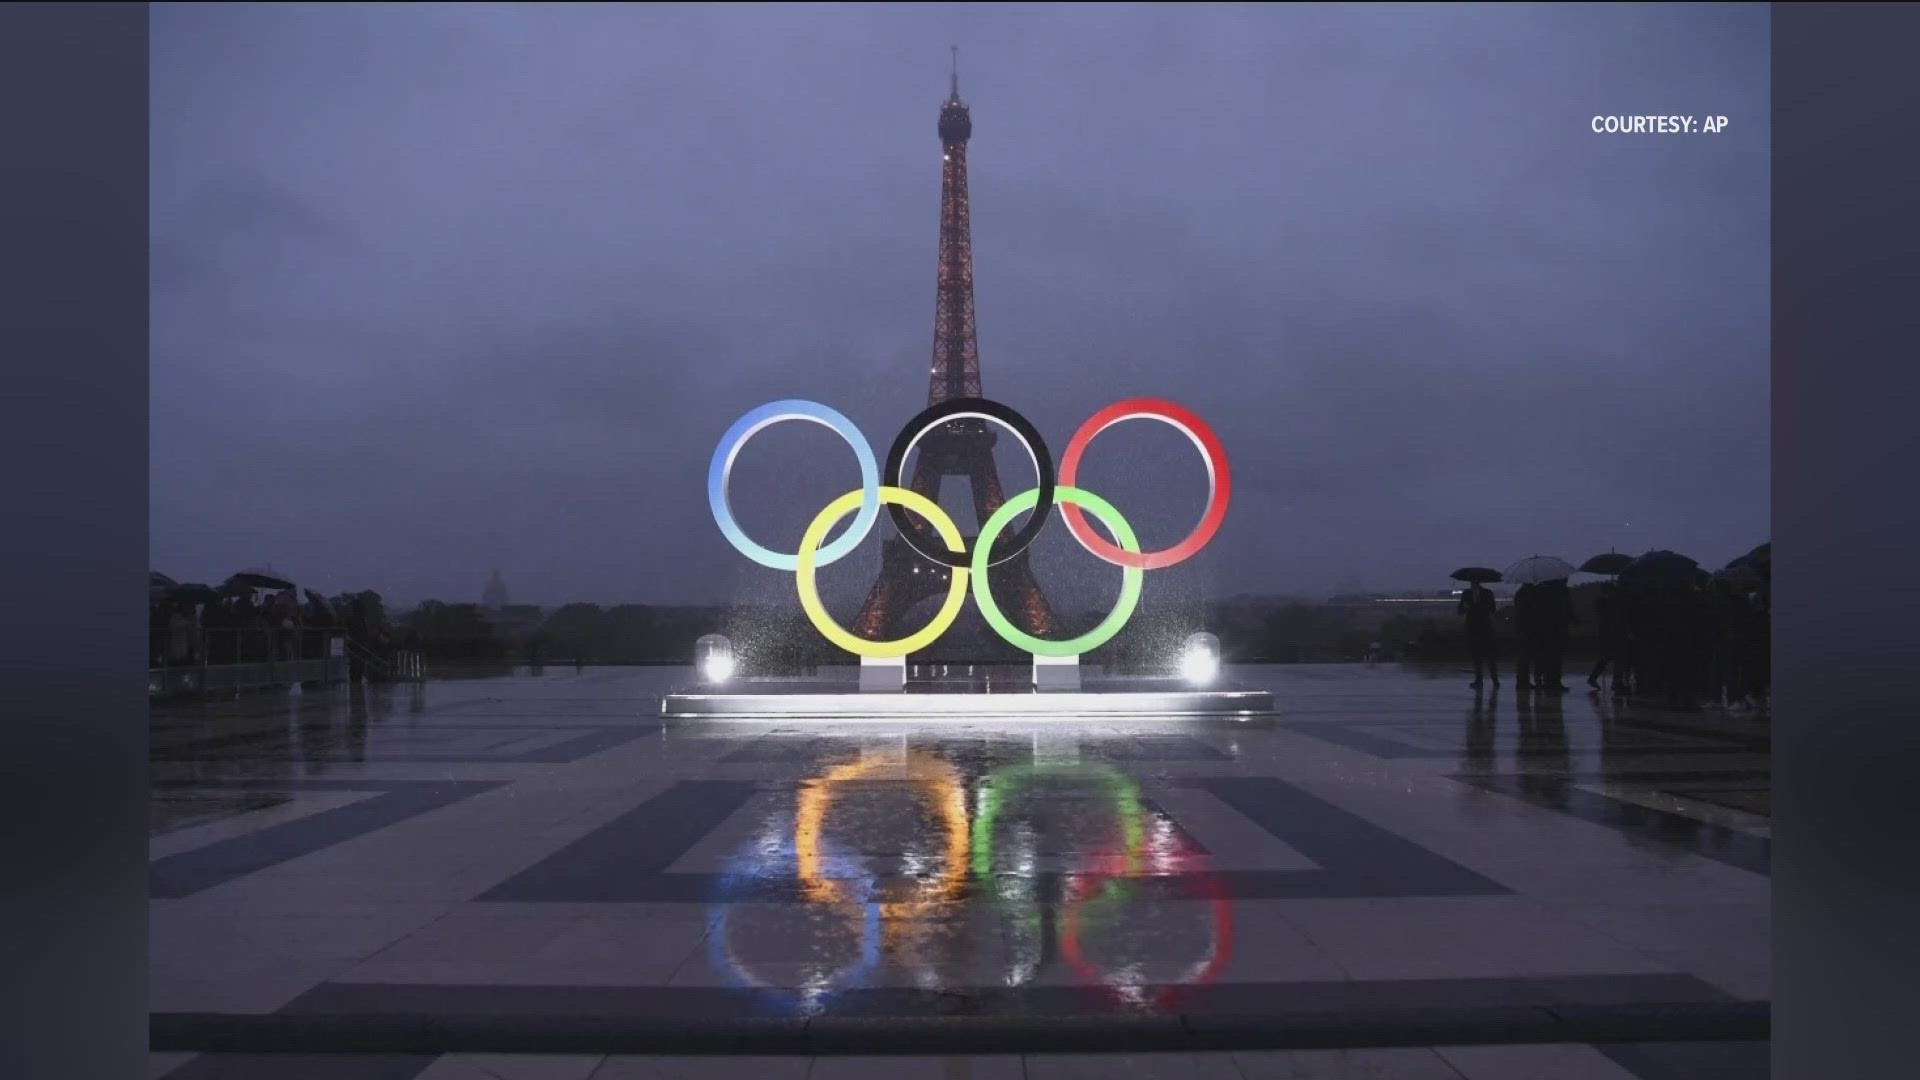 The hugely popular landmark in central Paris has seen soaring visitor numbers in the lead-up to the 2024 Games, and will likely see even more during the summer.